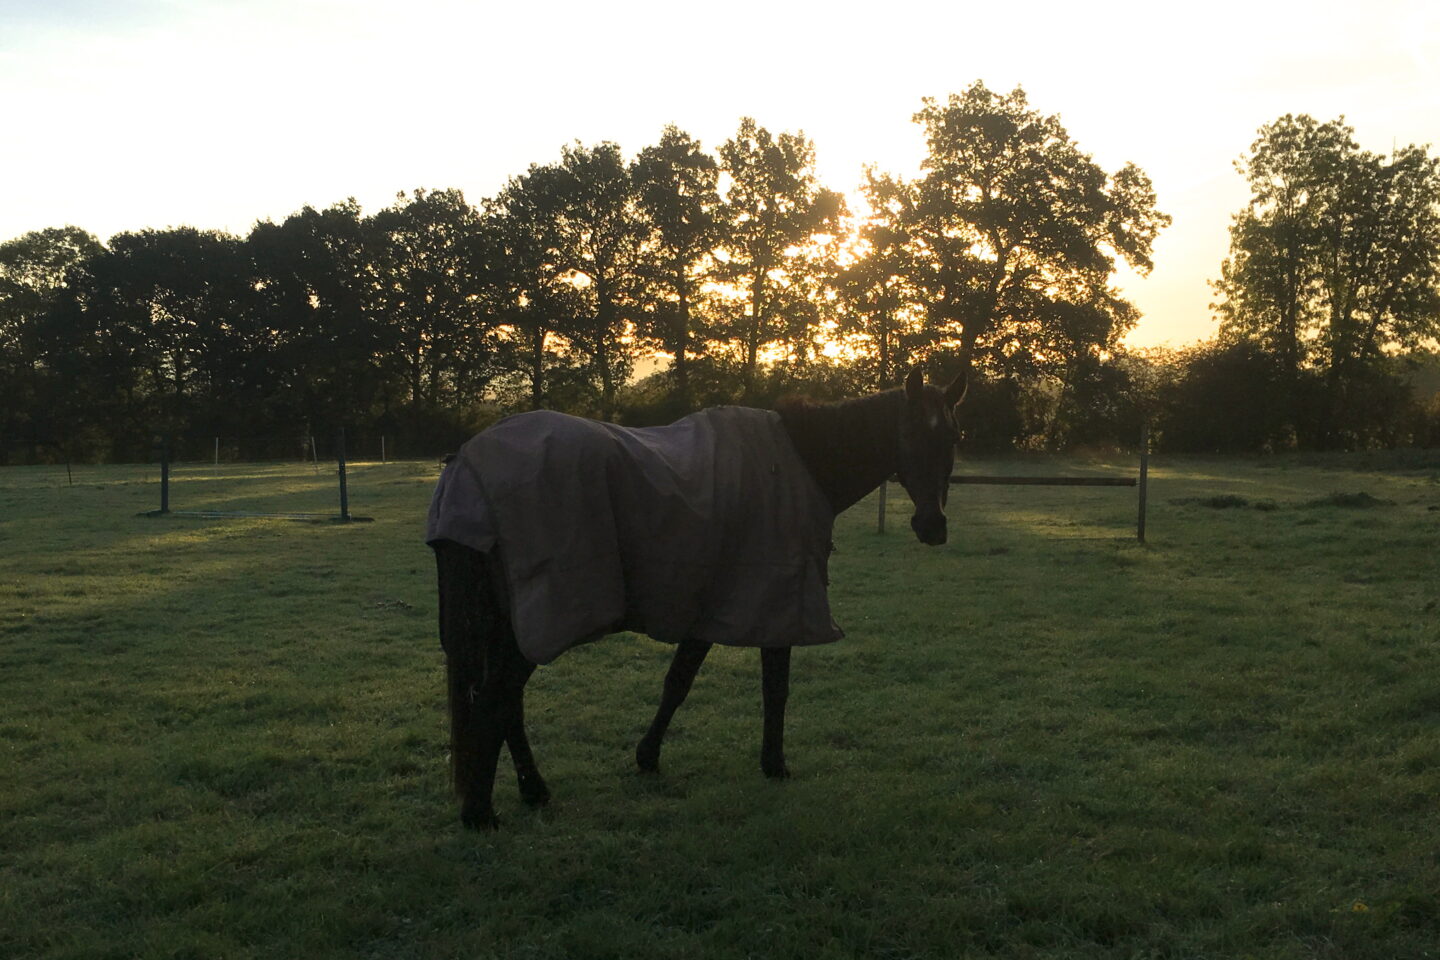 horse standing in field in early morning sunshine